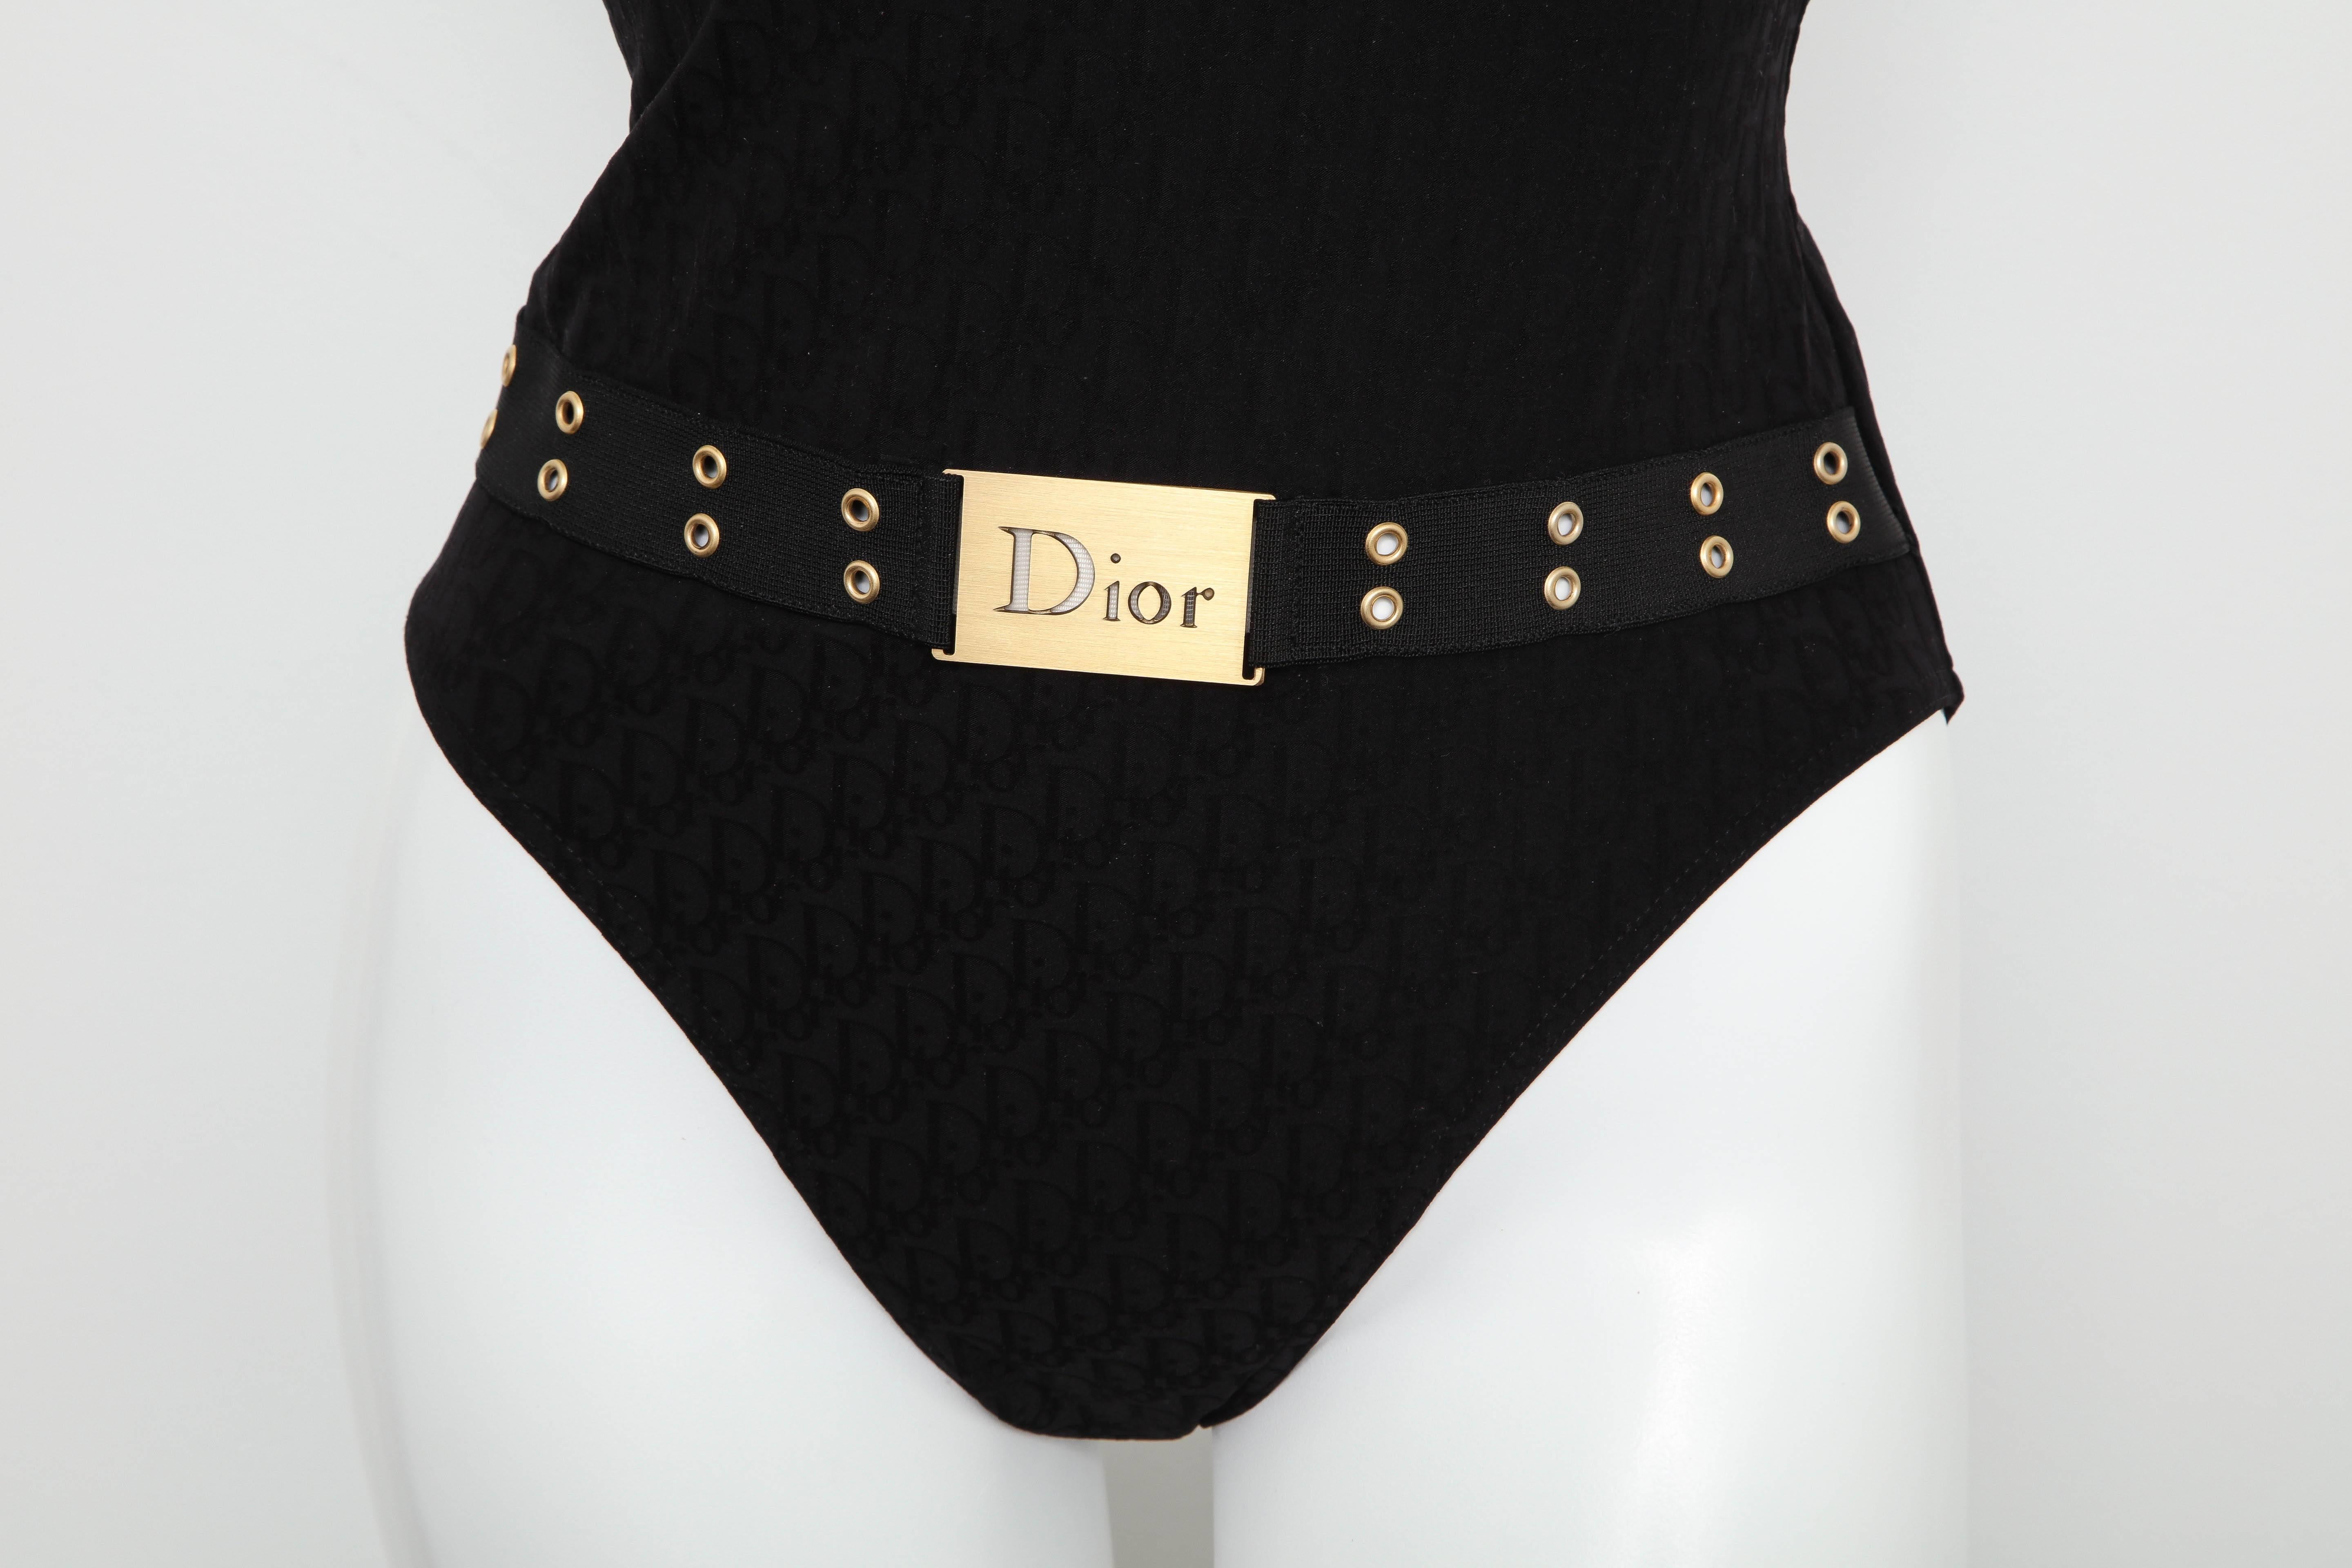 Extremely rare Christian Dior swimsuit in black with iconic logos and belt. From John Galliano era. 
Size FR 38. 